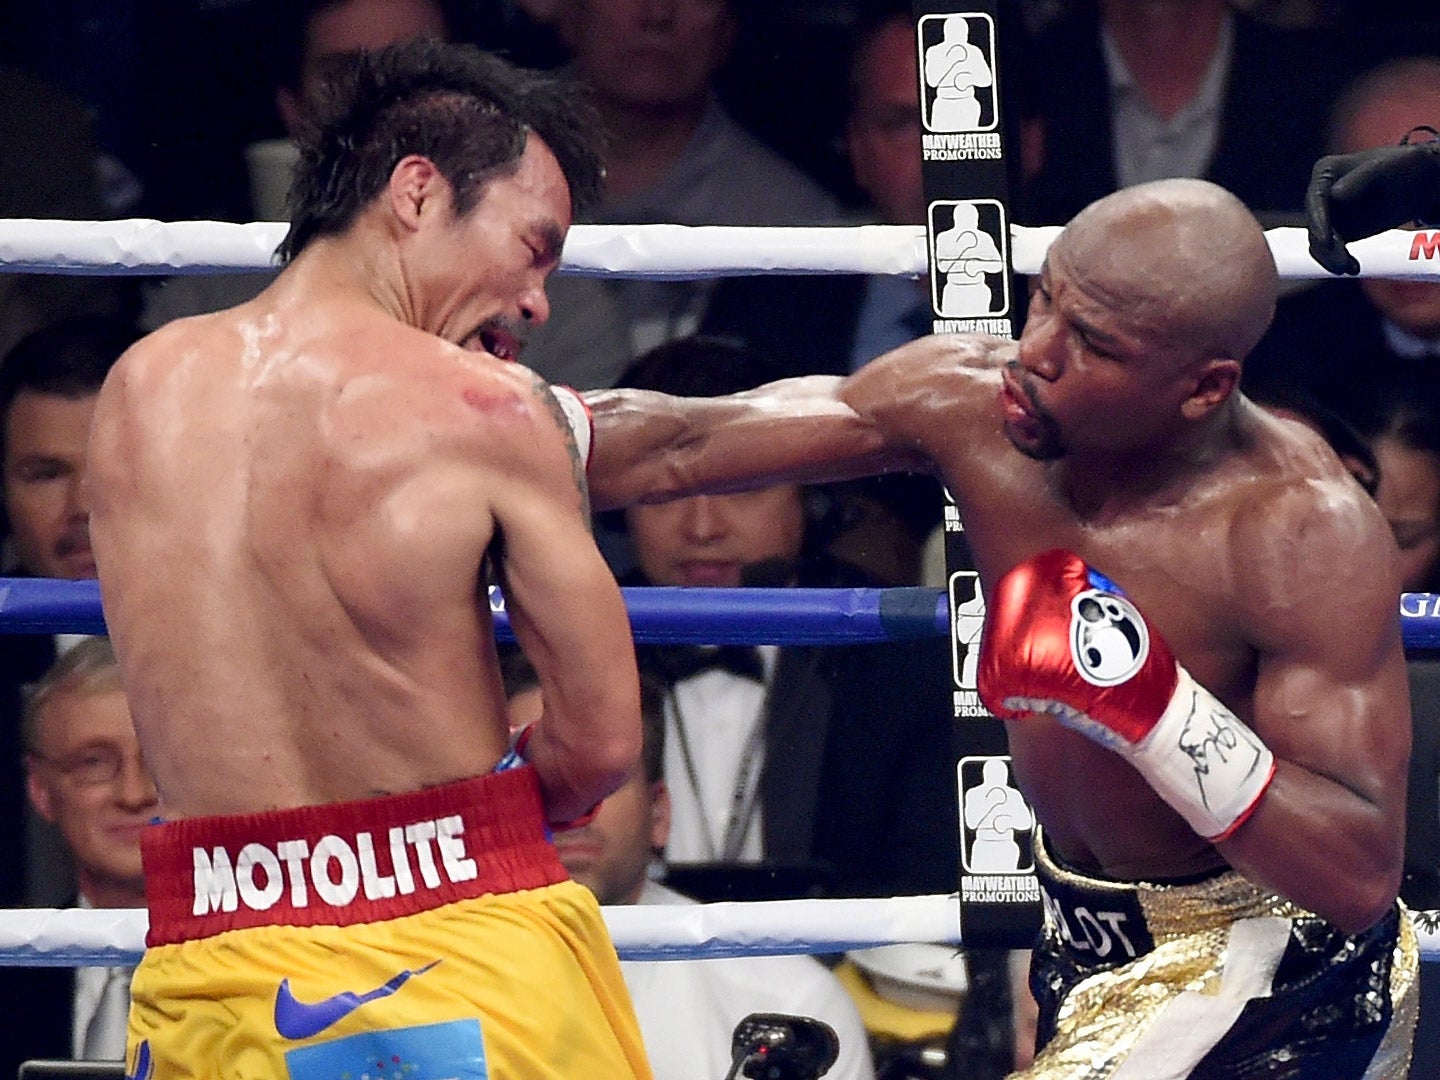 Floyd Mayweather lands a punch on Manny Pacquiao in Saturday night's fight